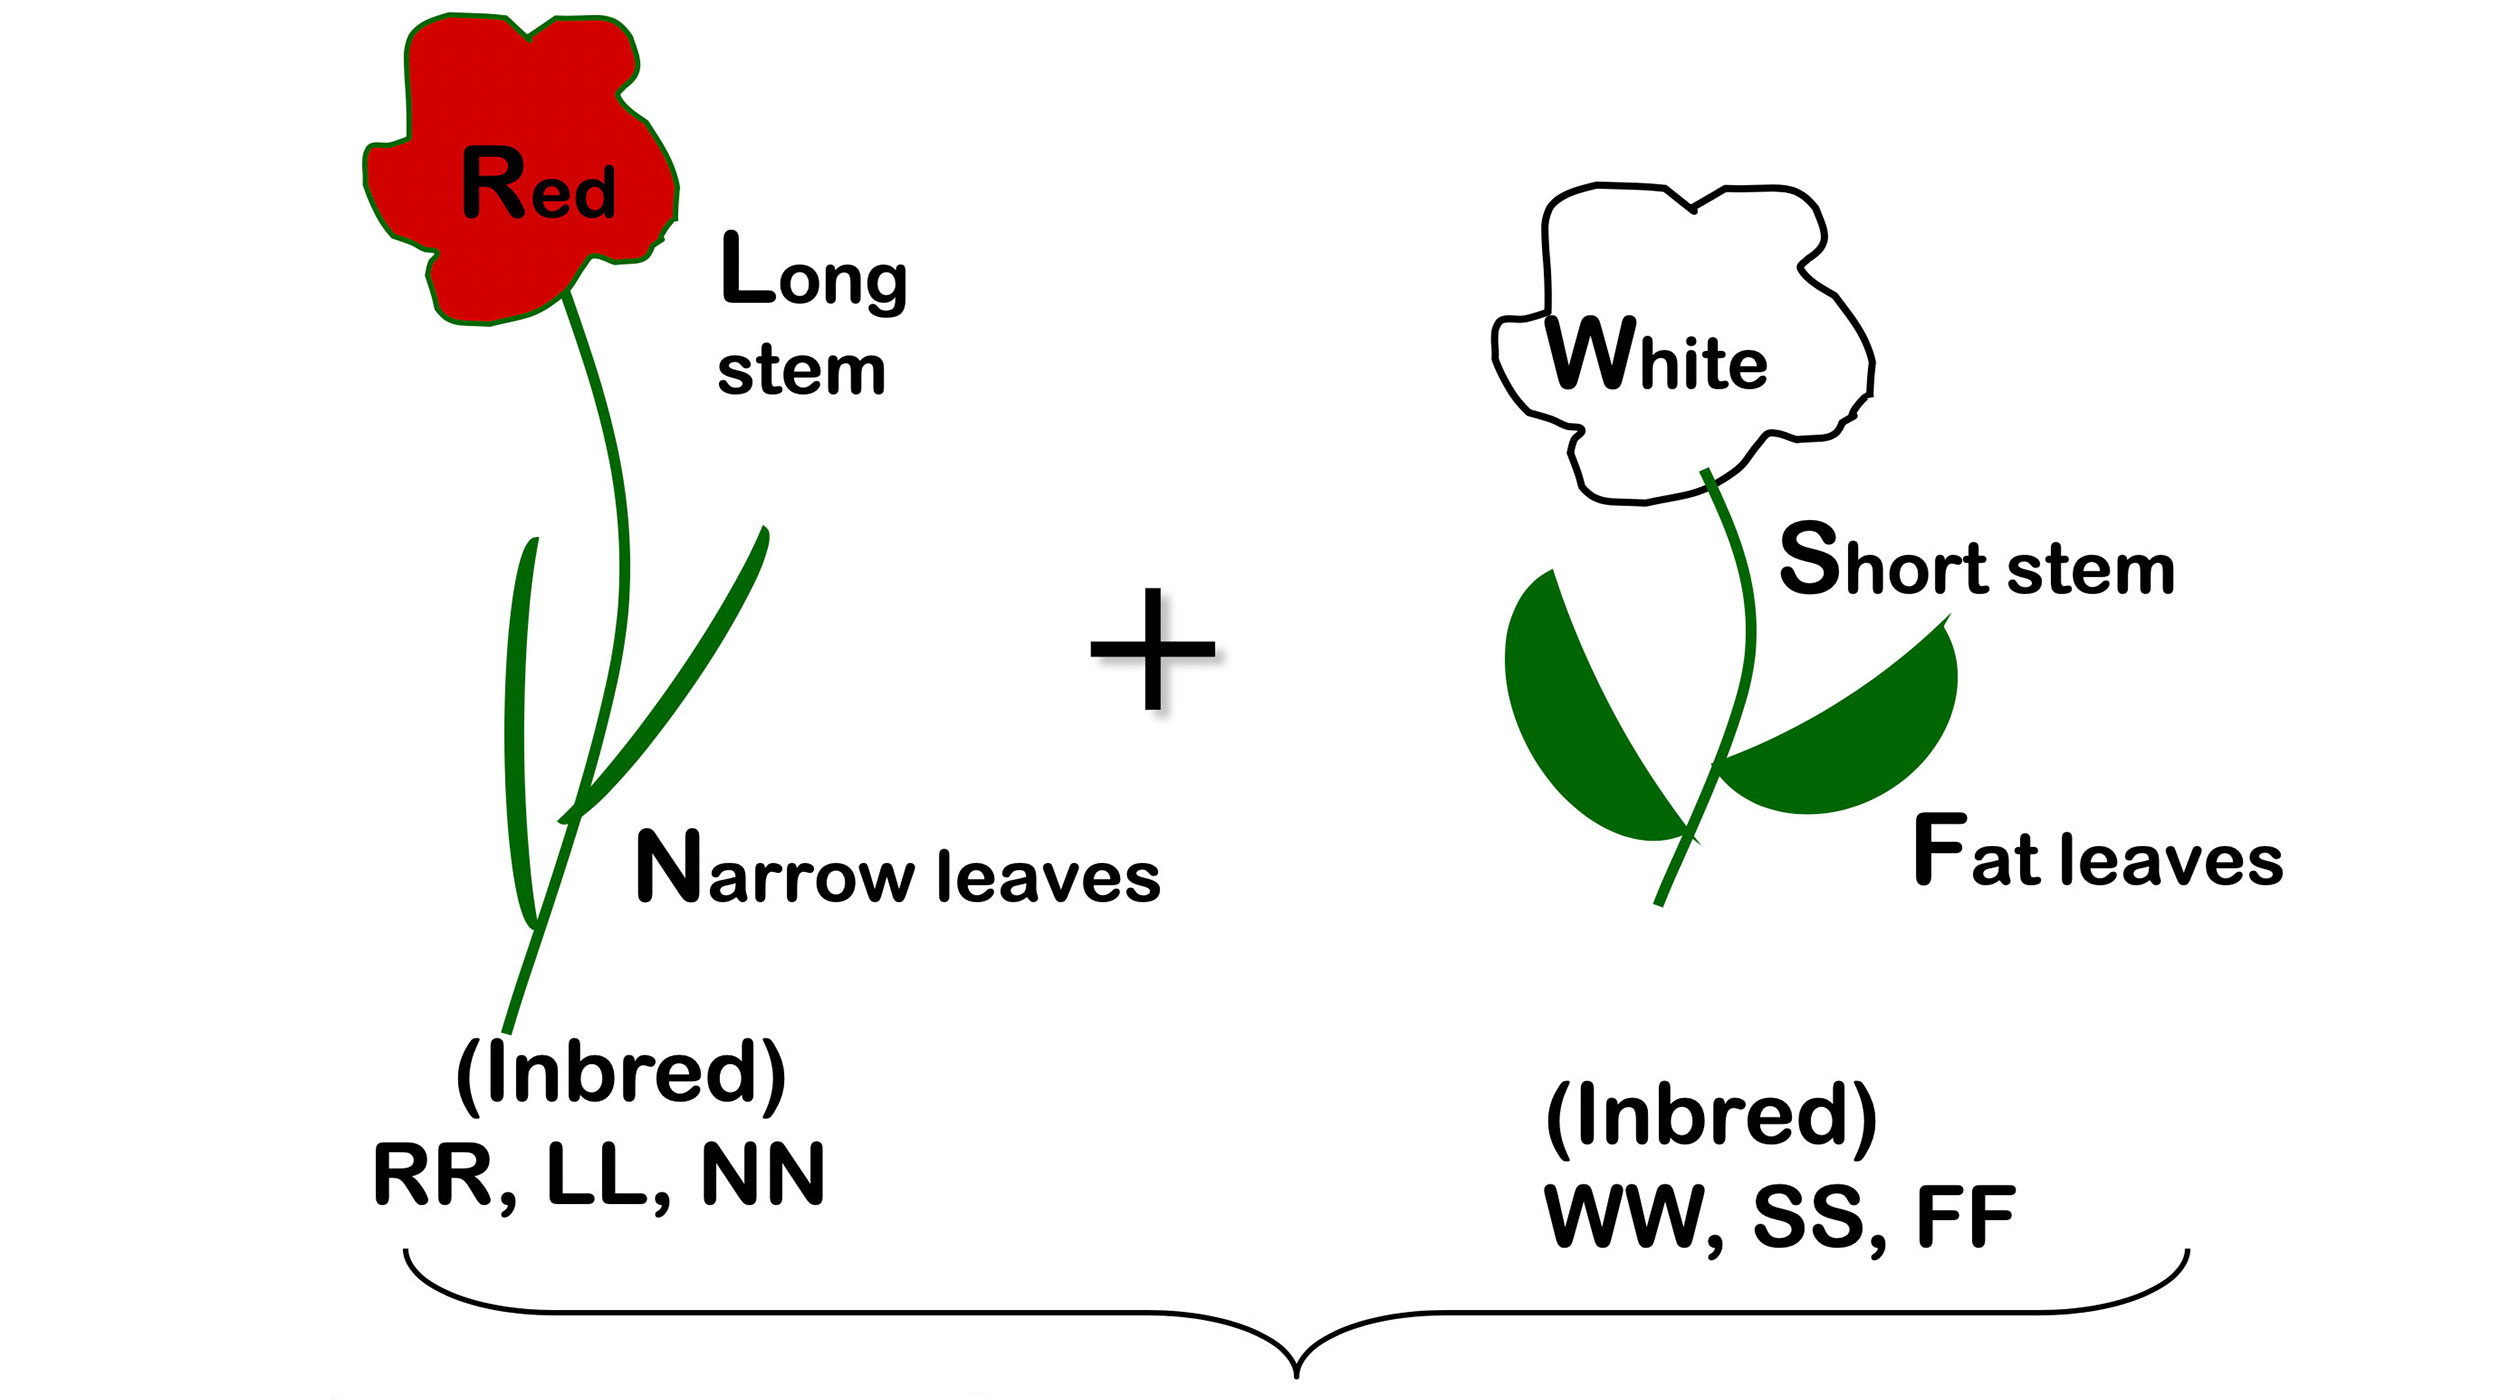 A diagram of two parent plants. The left plant is an inbred plant with a red flower, long stem, and narrow leaves. (Traits are labeled: RR, LL, NN) The right is an inbred plant with a white flower, short stem, and fat leaves. (Traits are labeled: WW, SS, FF)